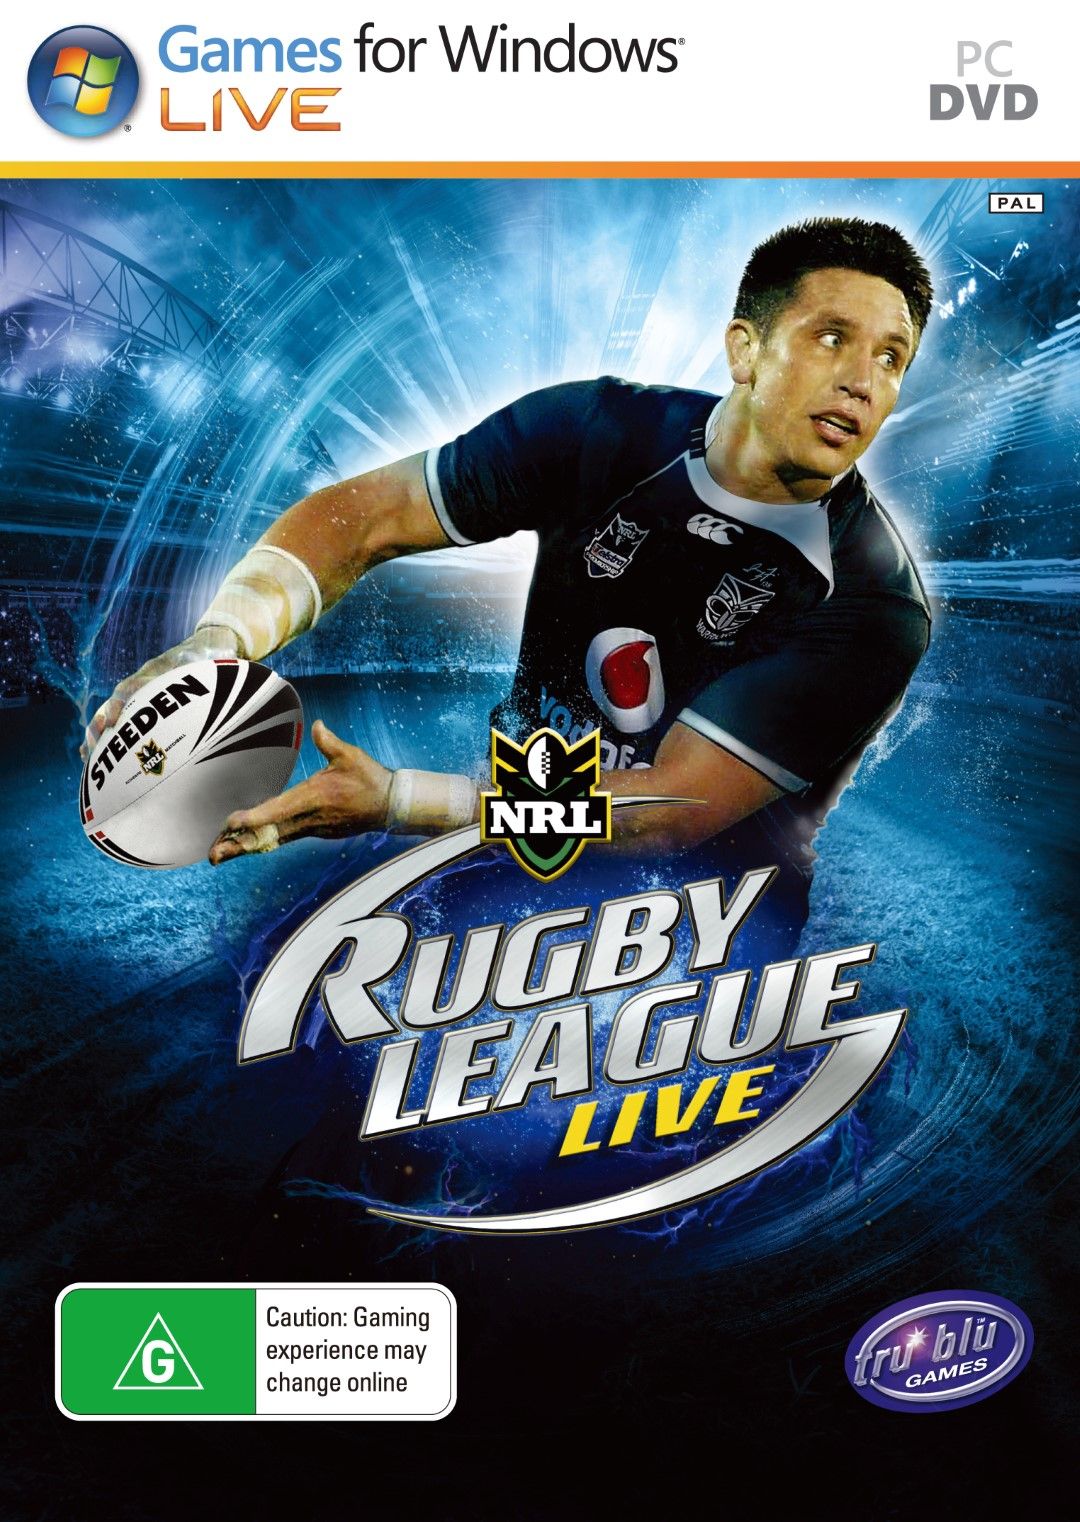 NRL Rugby League Live (PC)